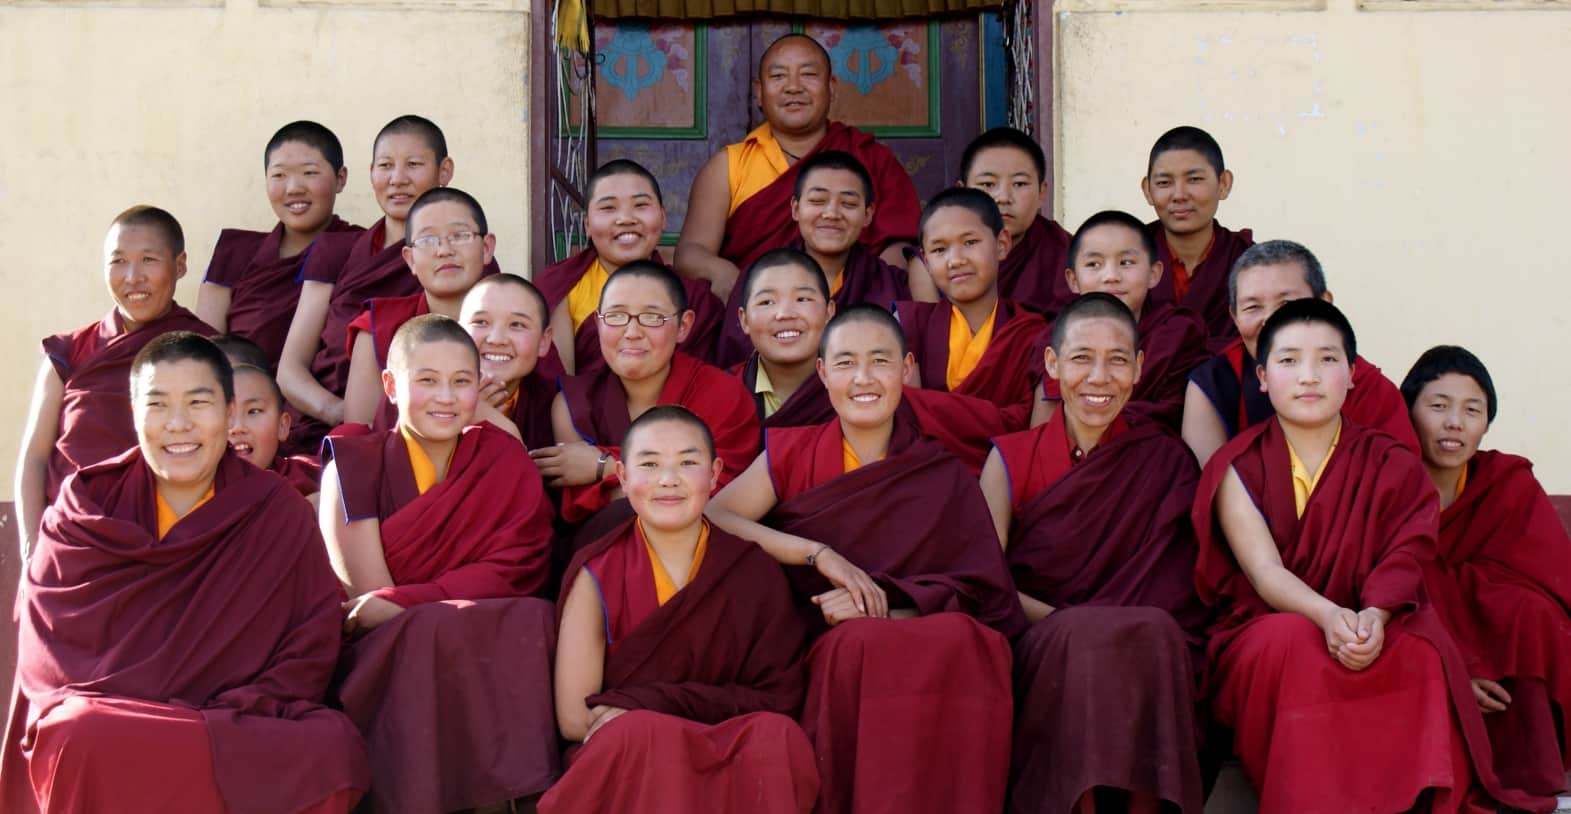 women in buddhism with teacher smiling sangha nunnery